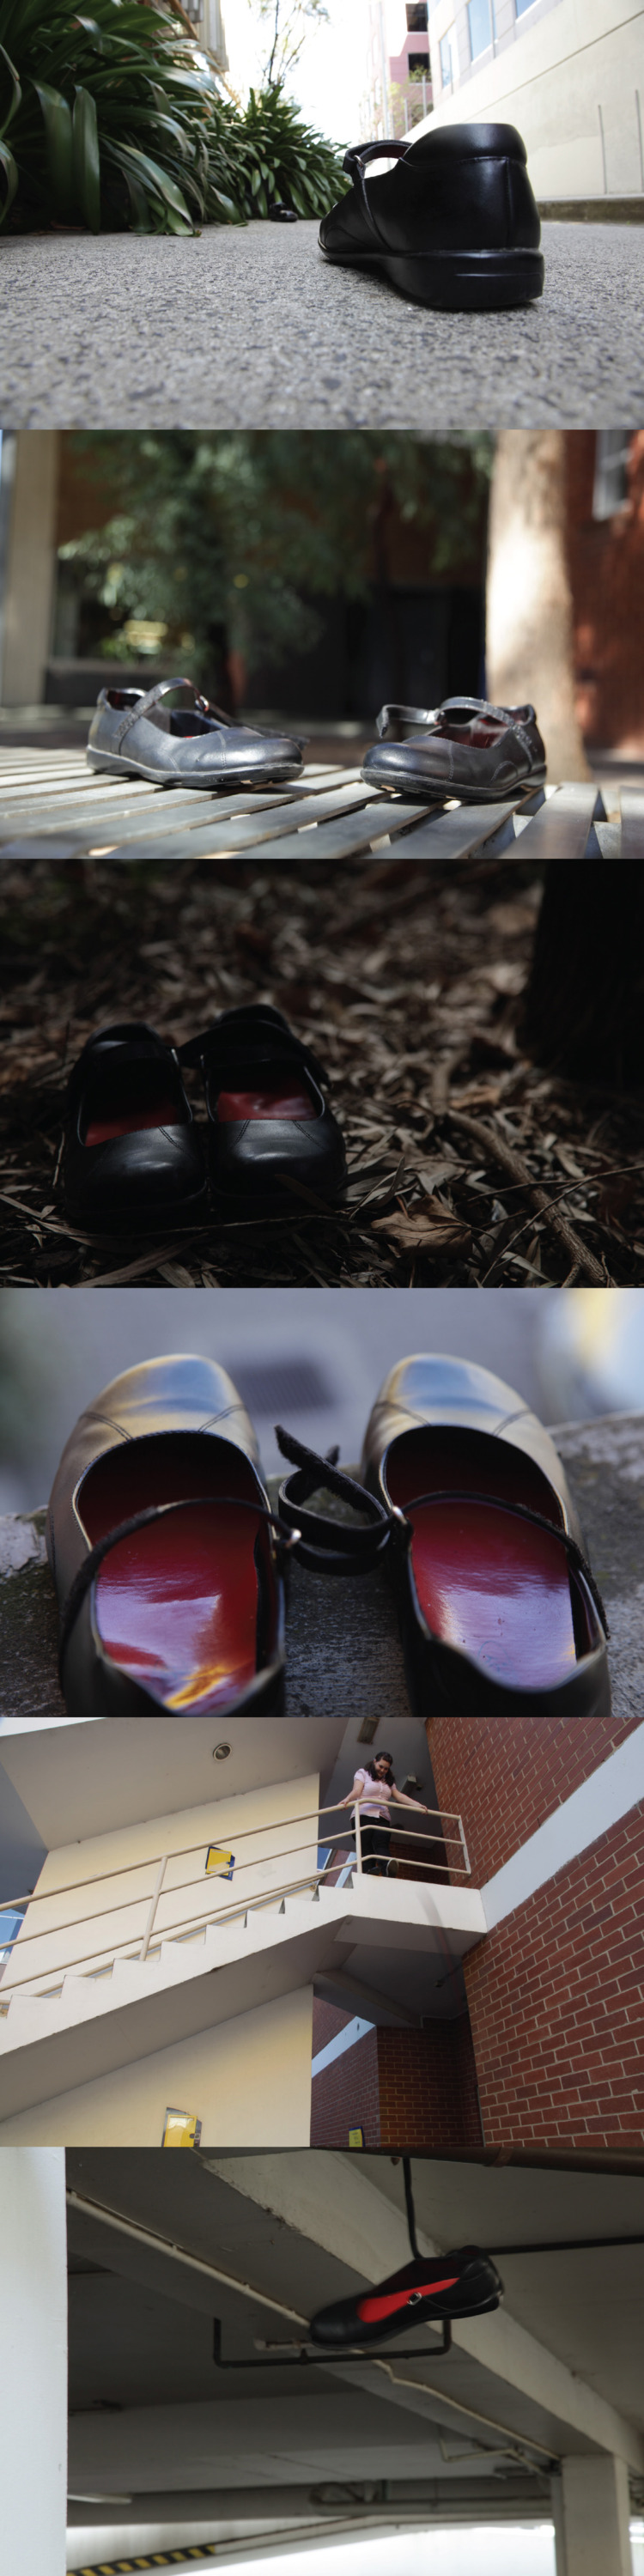 Pair of Shoes' Story